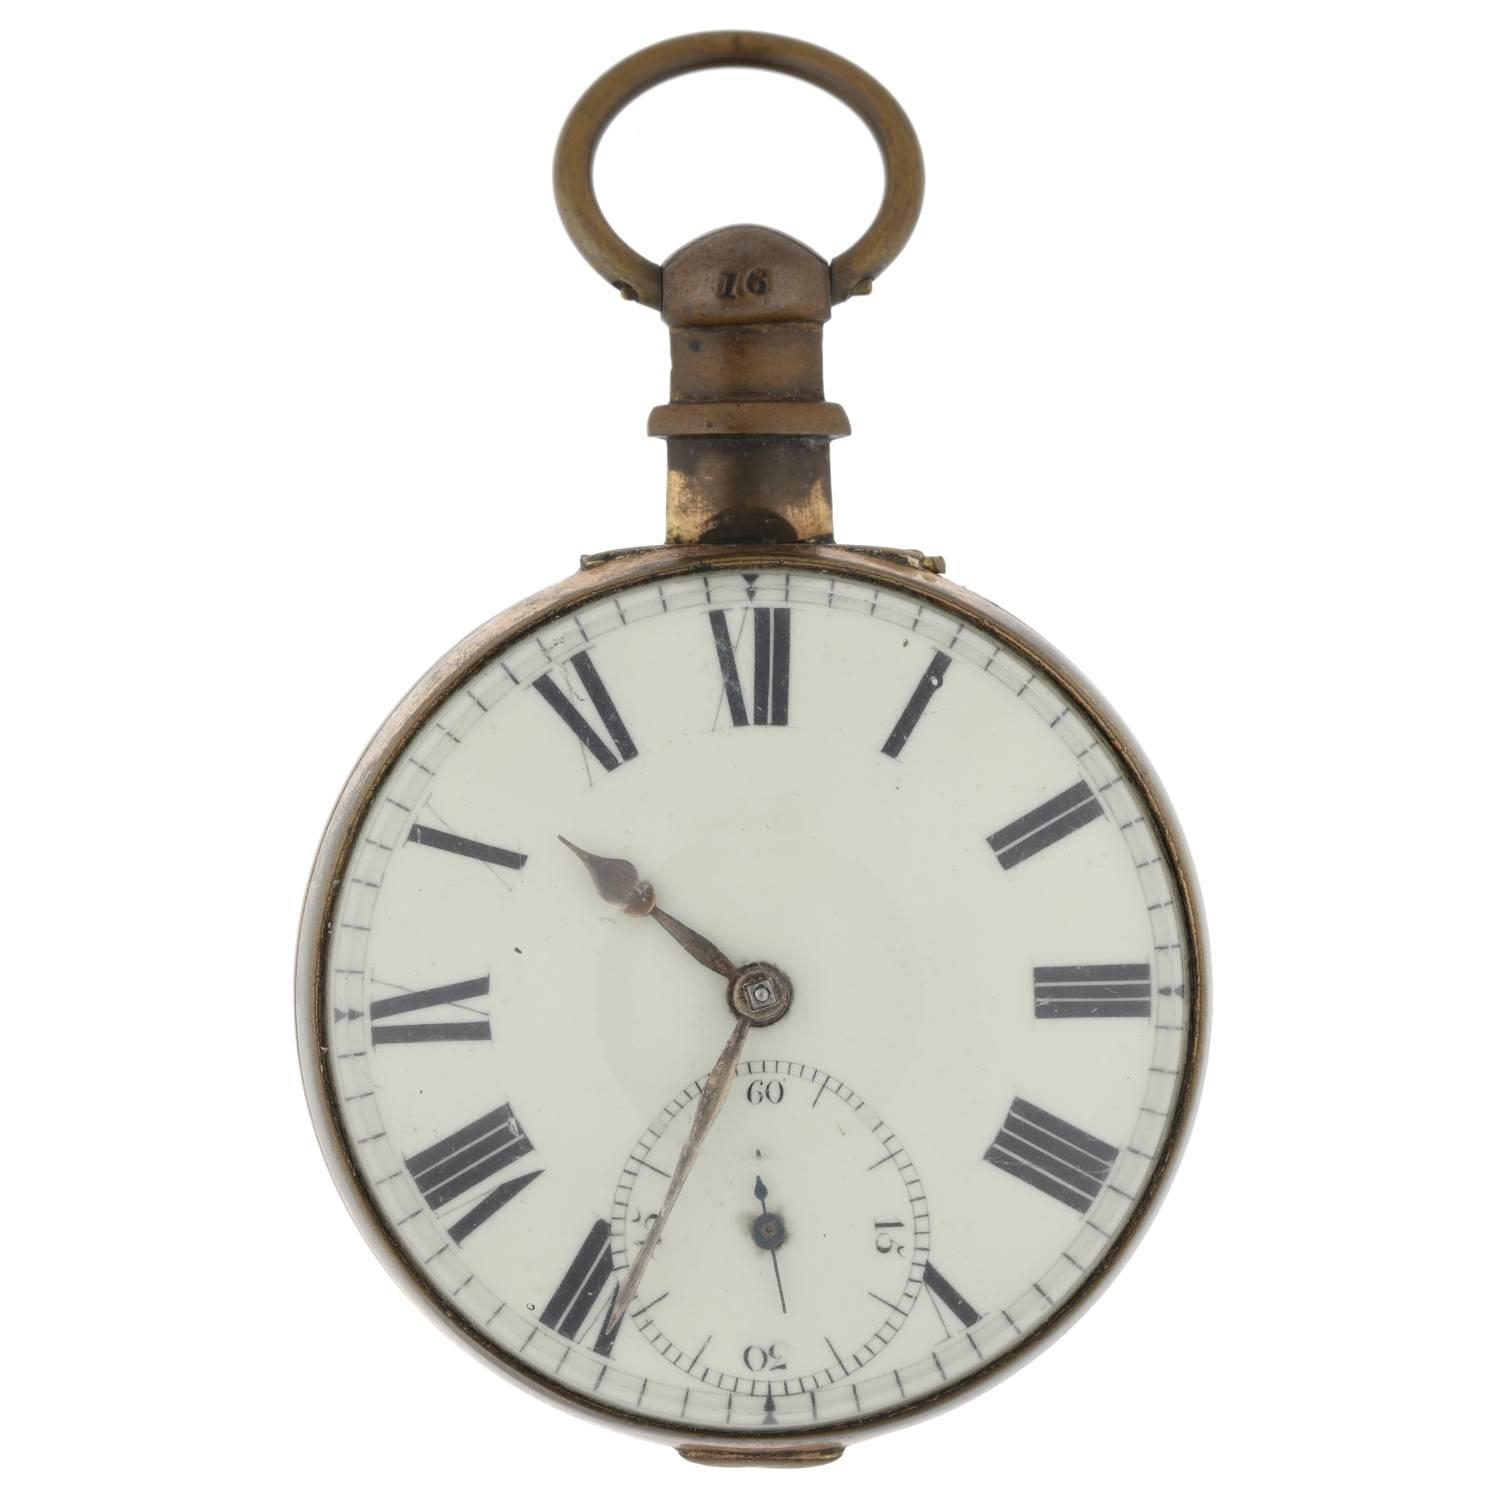 P. Rielly, Dublin - Irish early 19th century gilt metal pair cased verge pocket watch, signed - Image 3 of 7